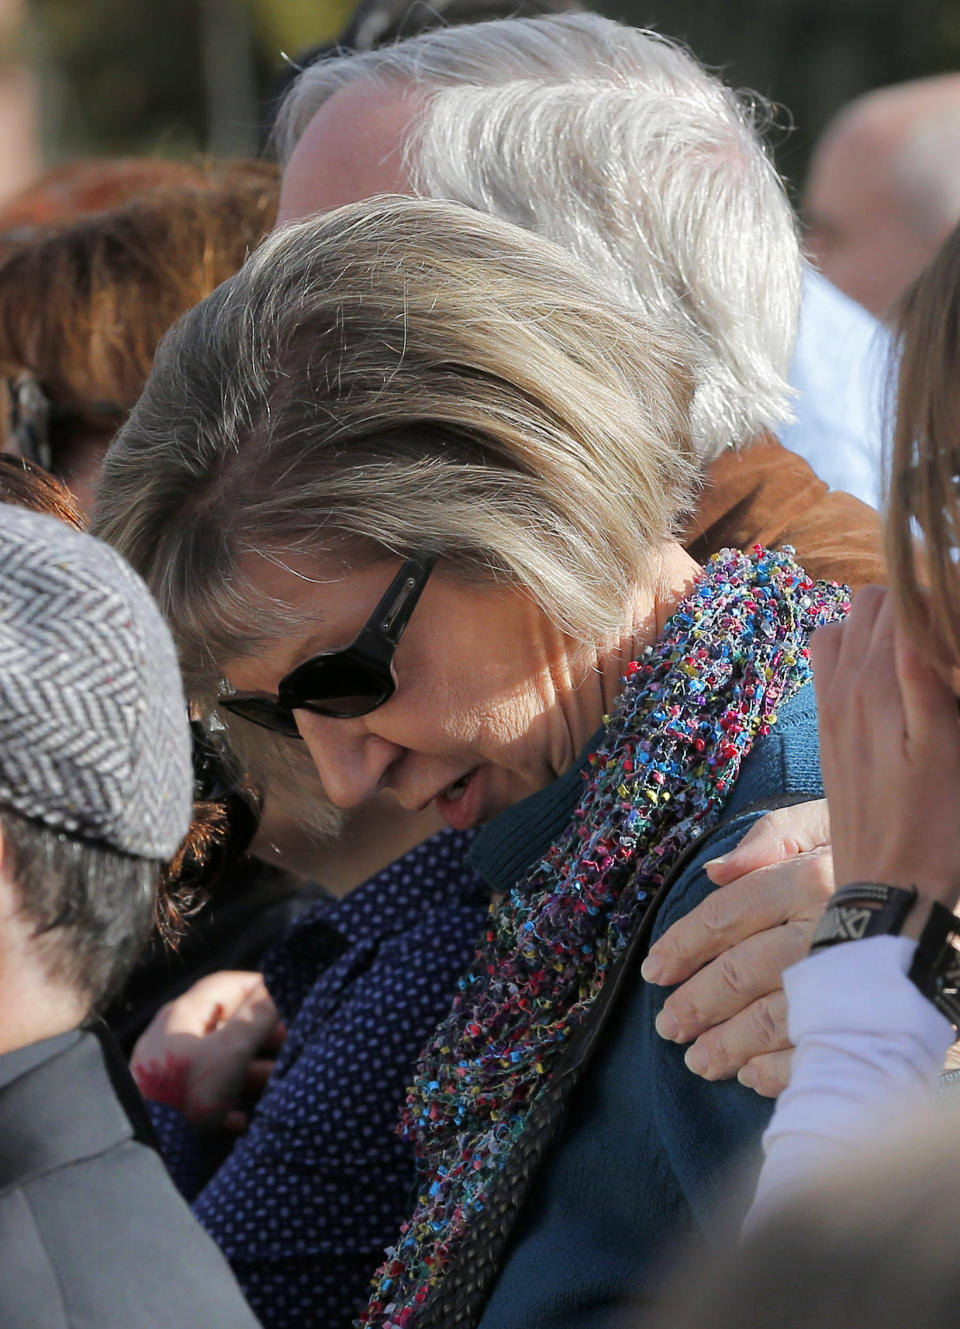 Tucson shooting survivor Pam Simon lowers her head during a remembrance ceremony on the third anniversary of the Tucson shootings, Wednesday, Jan. 8, 2014, in Tucson, Ariz. Six people were killed and 13 wounded, including U.S. Rep. Gabrielle Giffords, D-Ariz., in the shooting rampage at a community event hosted by Giffords in 2011. Jared Lee Loughner was sentenced in November 2012 to seven consecutive life sentences, plus 140 years, after he pleaded guilty to 19 federal charges in the shooting. (AP Photo/Matt York)